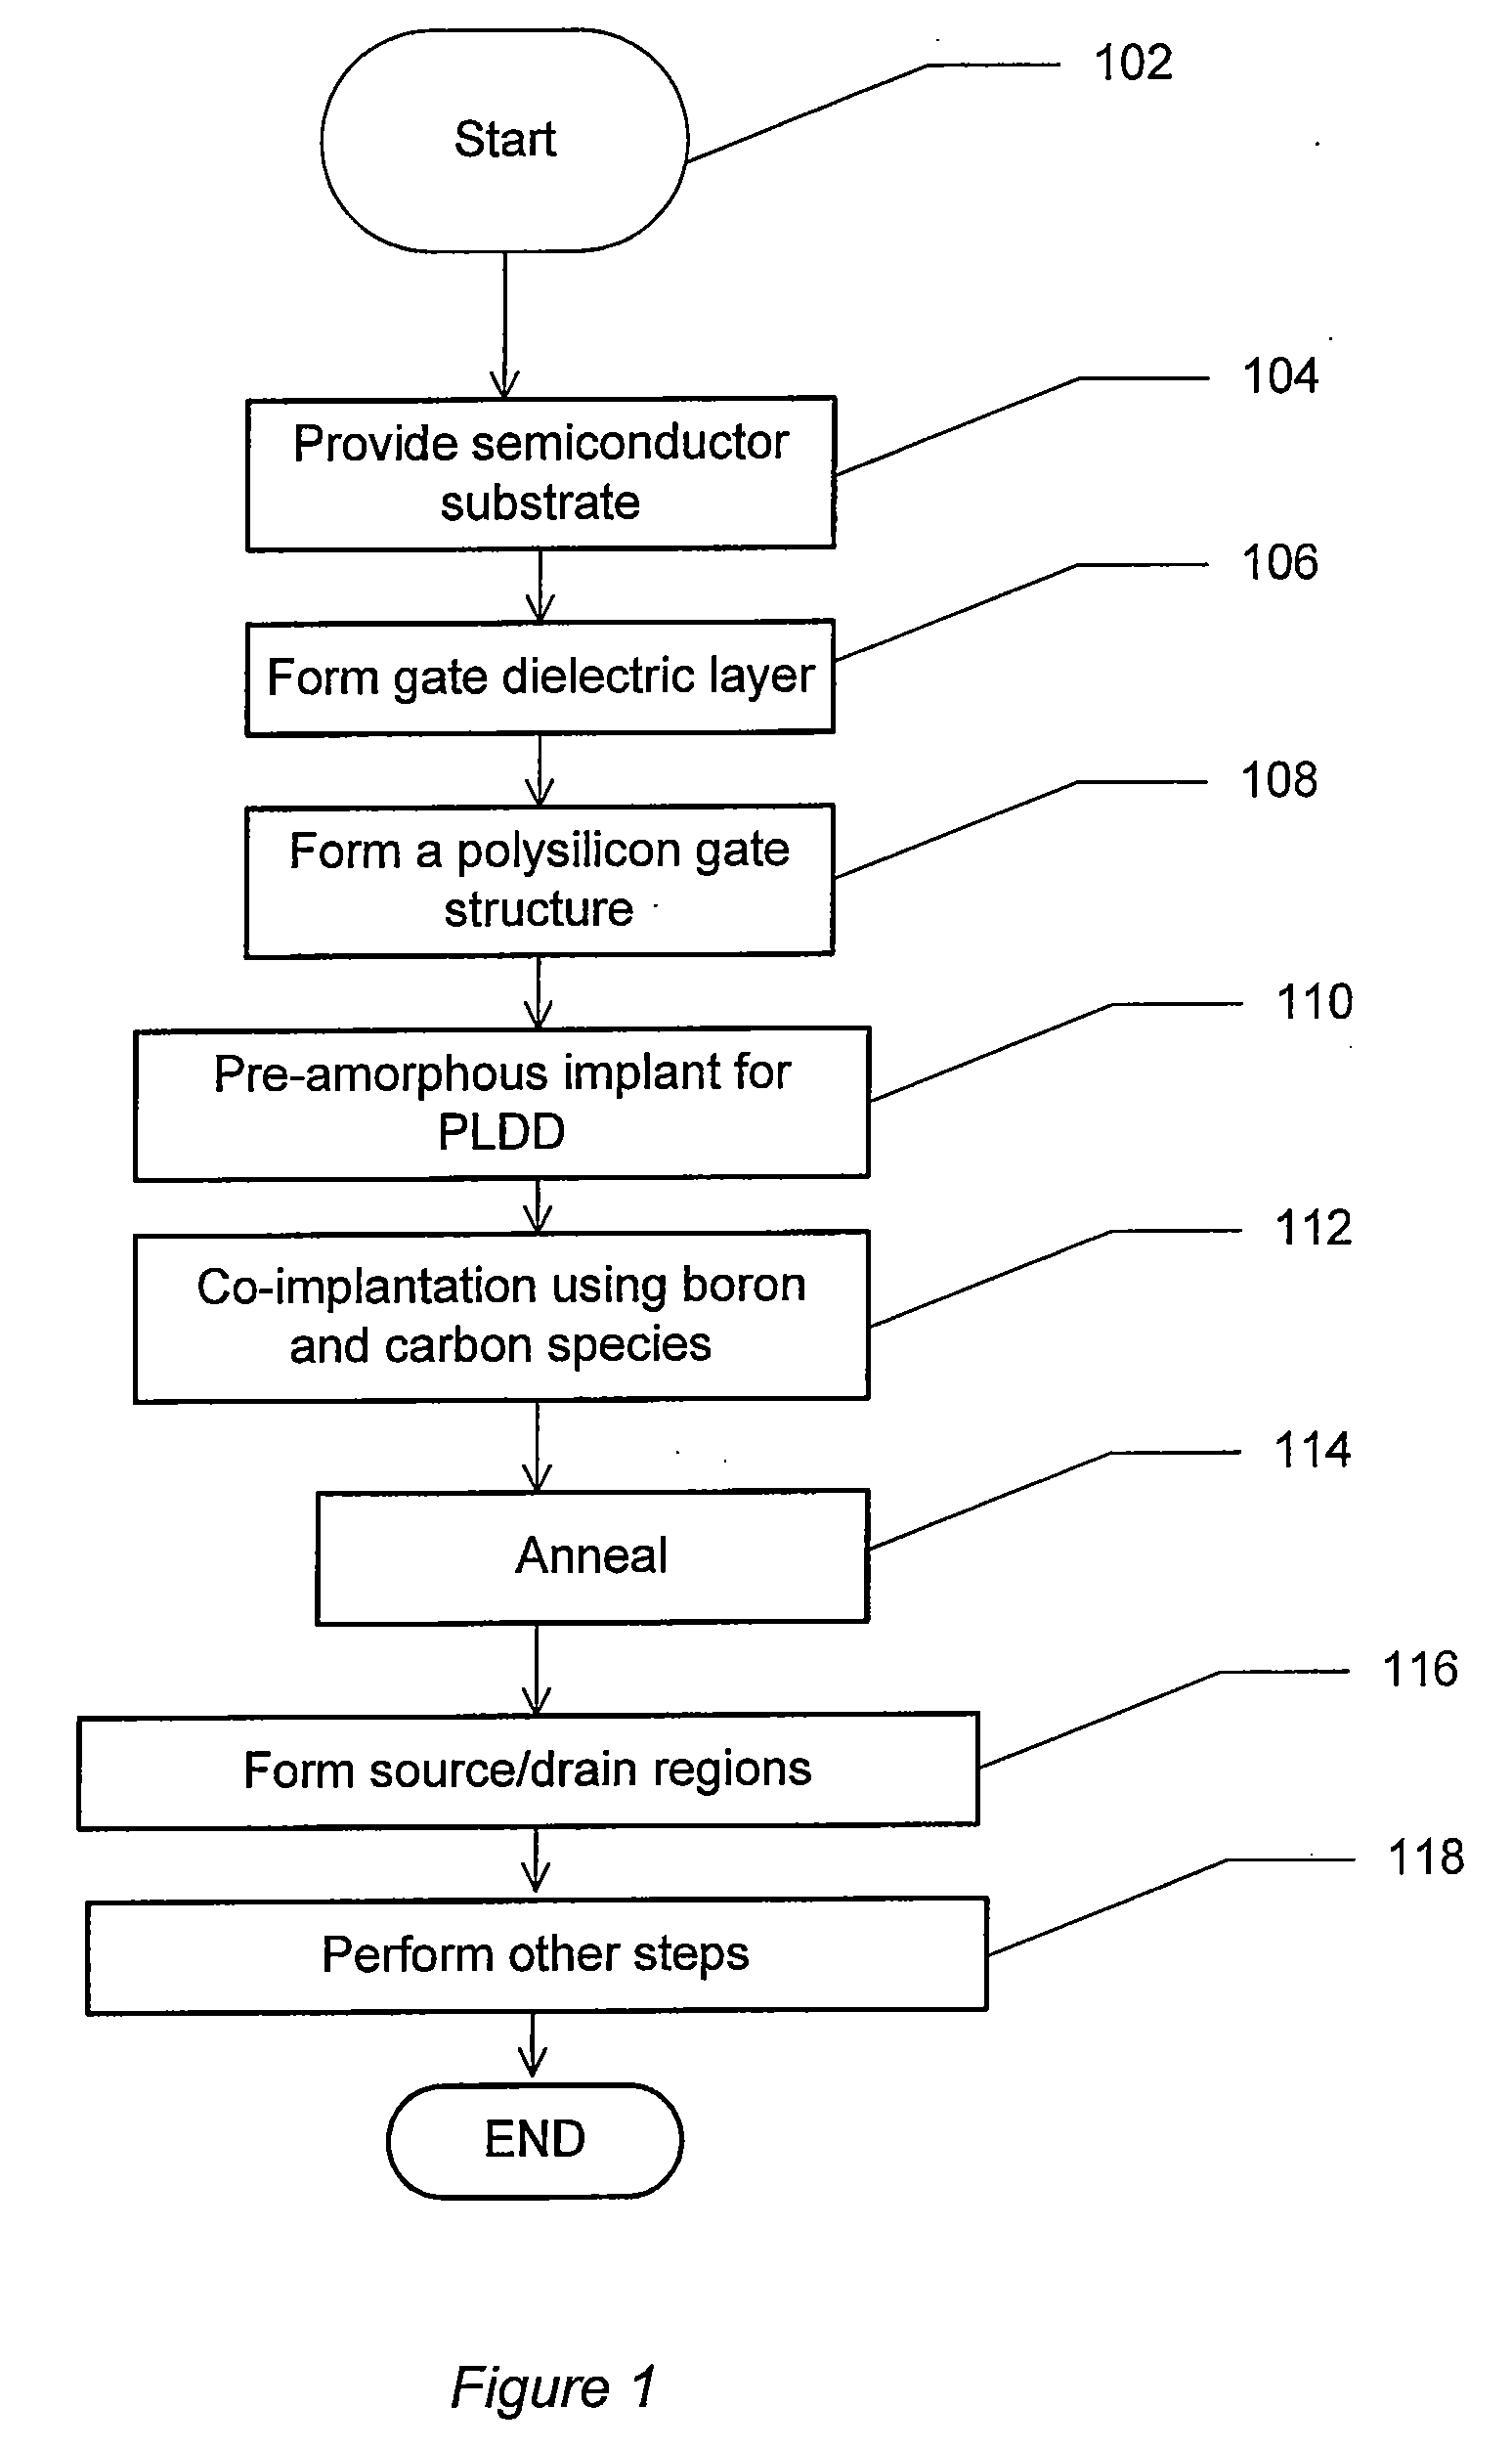 Method for forming p-type lightly doped drain region using germanium pre-amorphous treatment